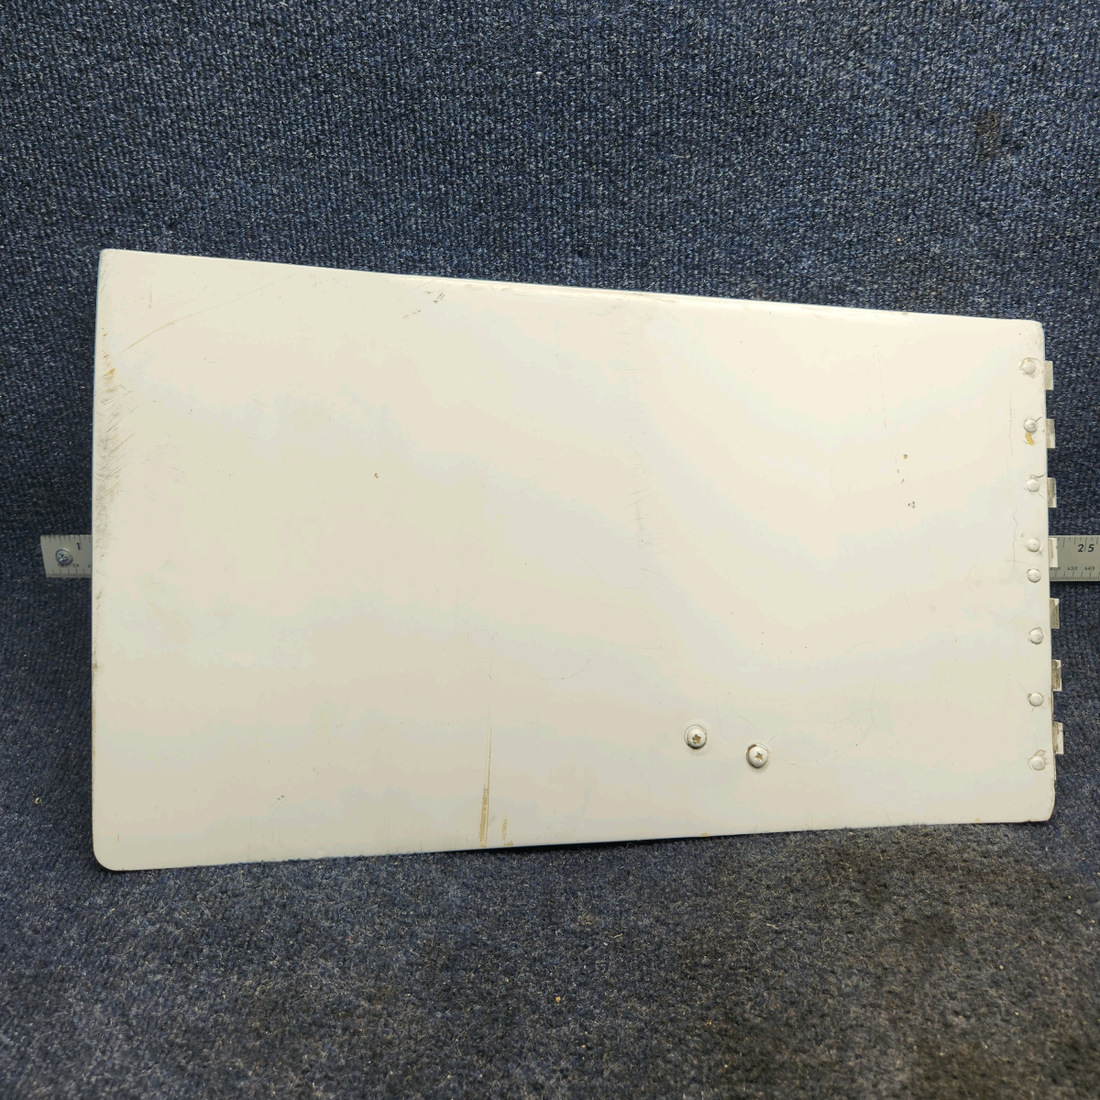 Used aircraft parts for sale, 7090-011 Piper PA32RT-300 RH MAIN GEAR DOOR ASSEMBLY